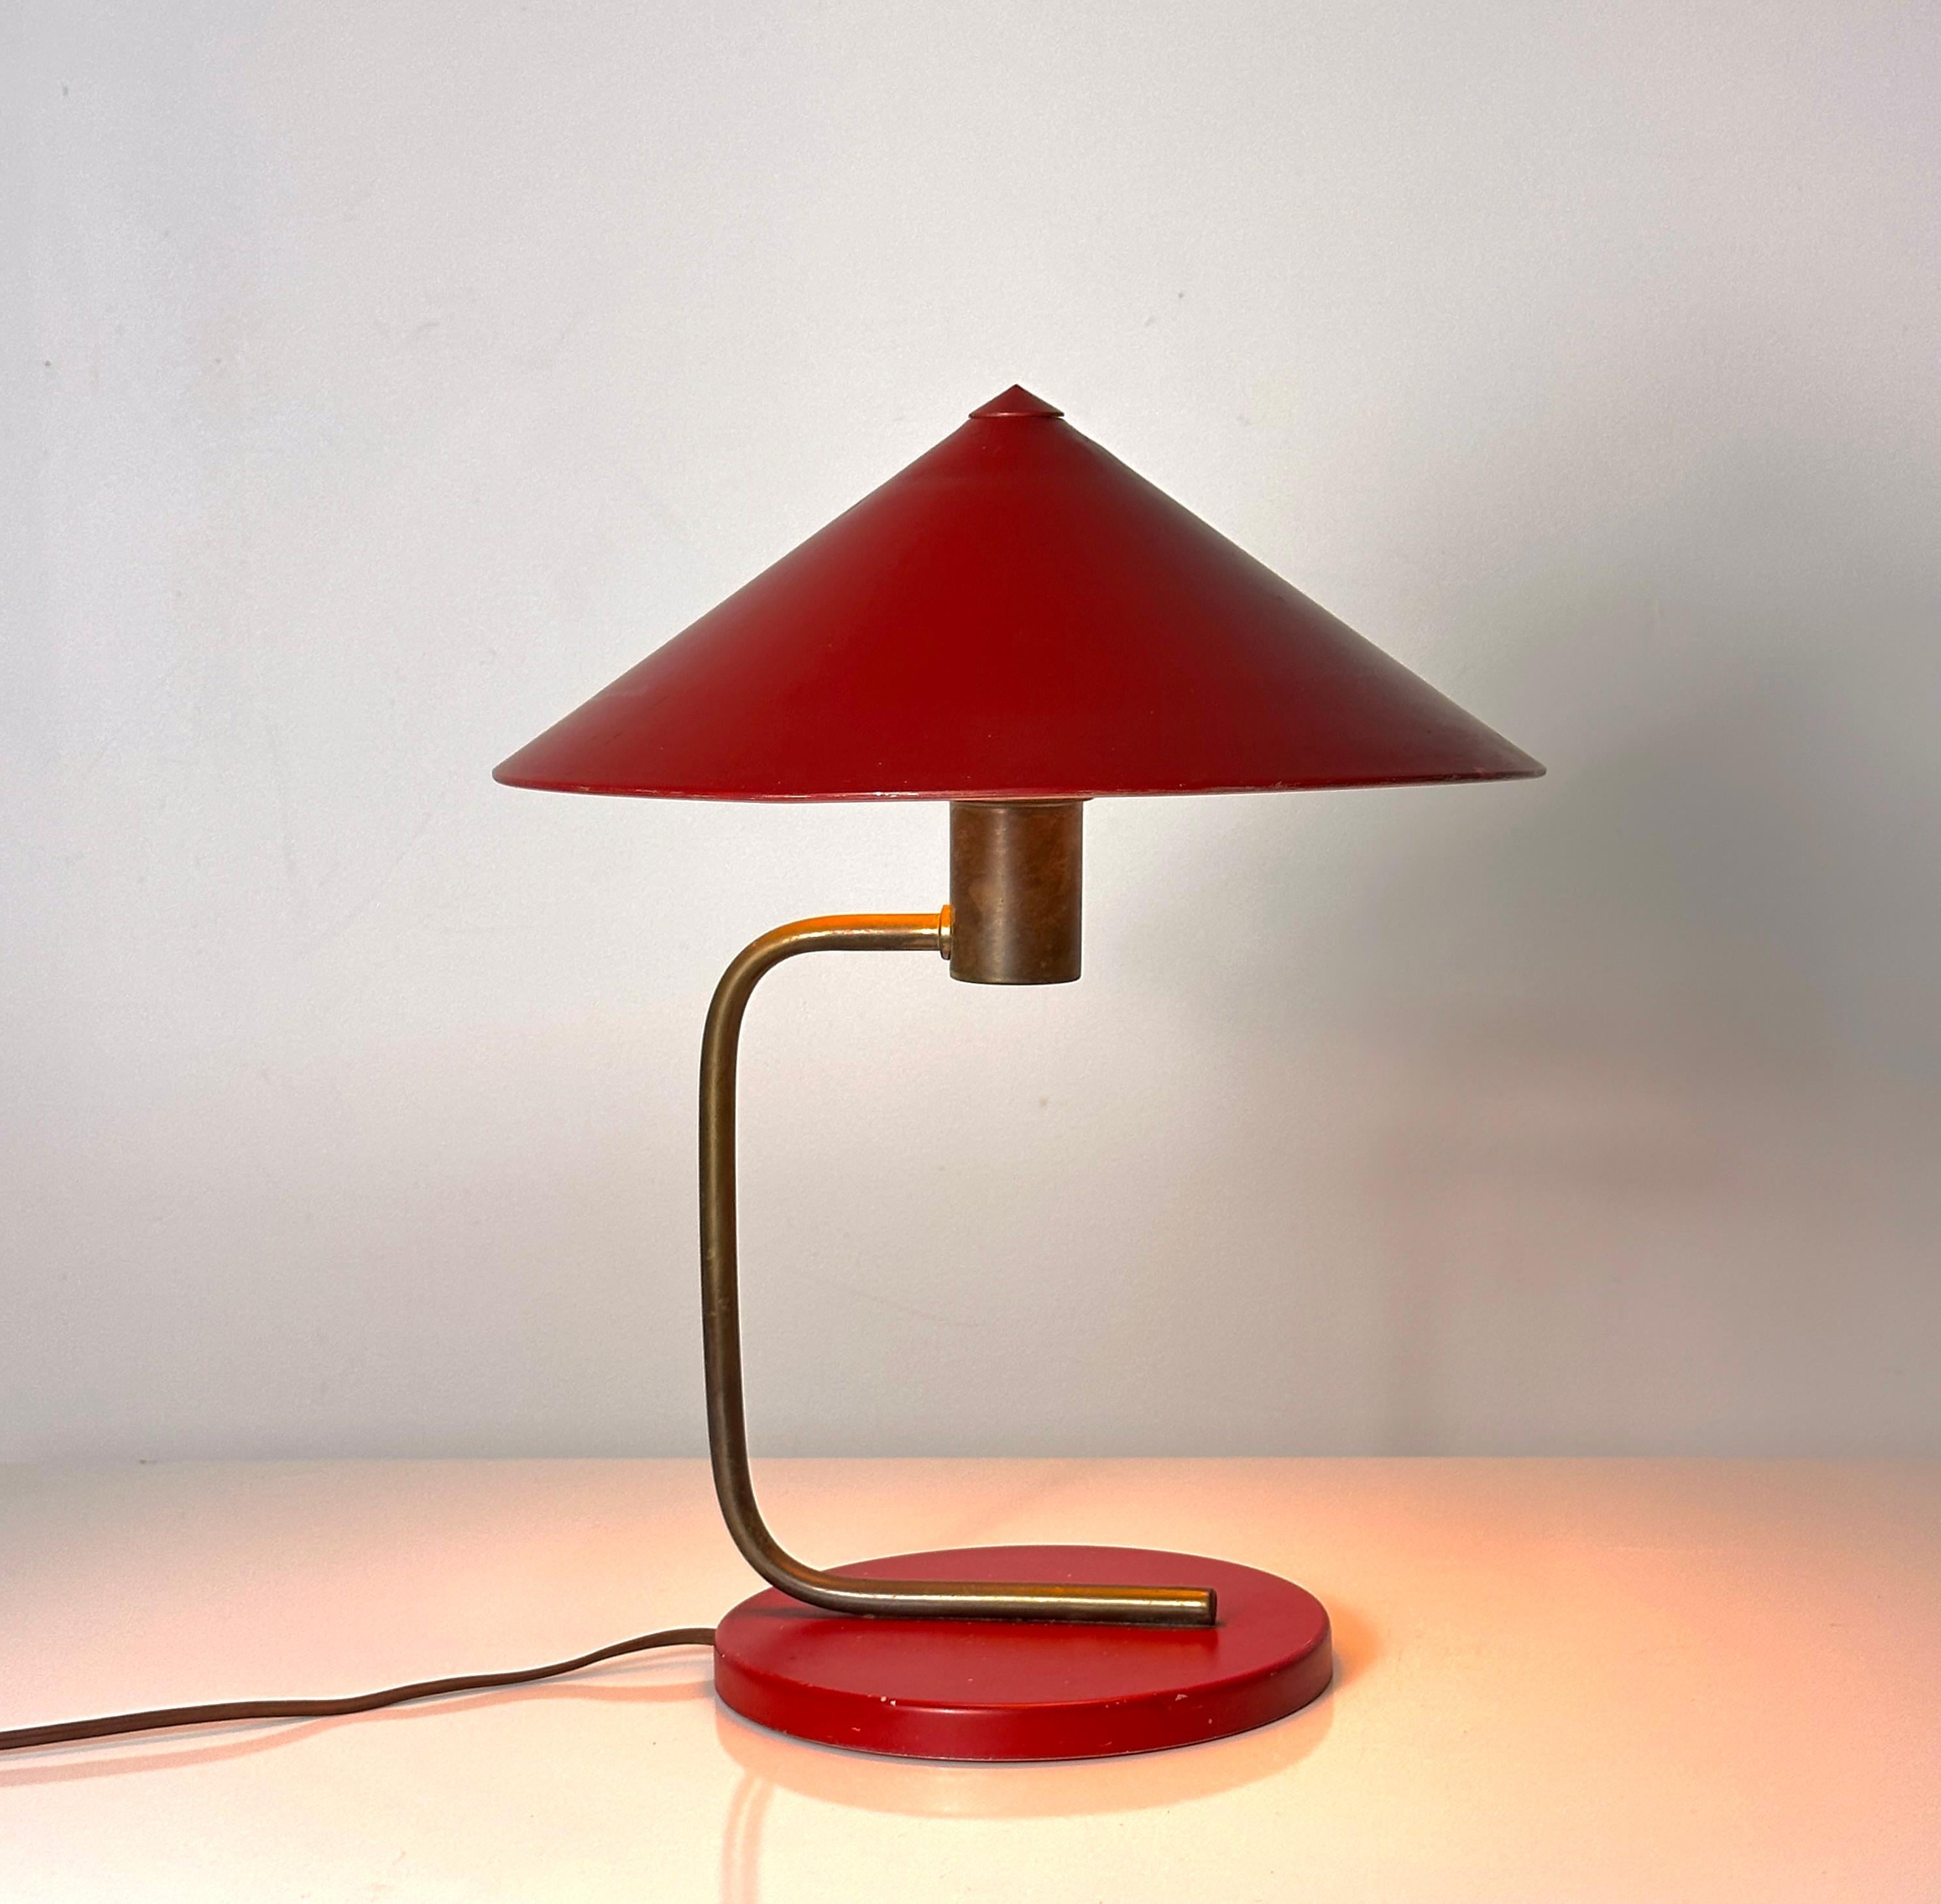 Iconic table lamp designed by Walter Von Nessen circa 1930
Red enameled aluminum canopy shade with brass arm on a red base
Stamped Spear CL2 to base